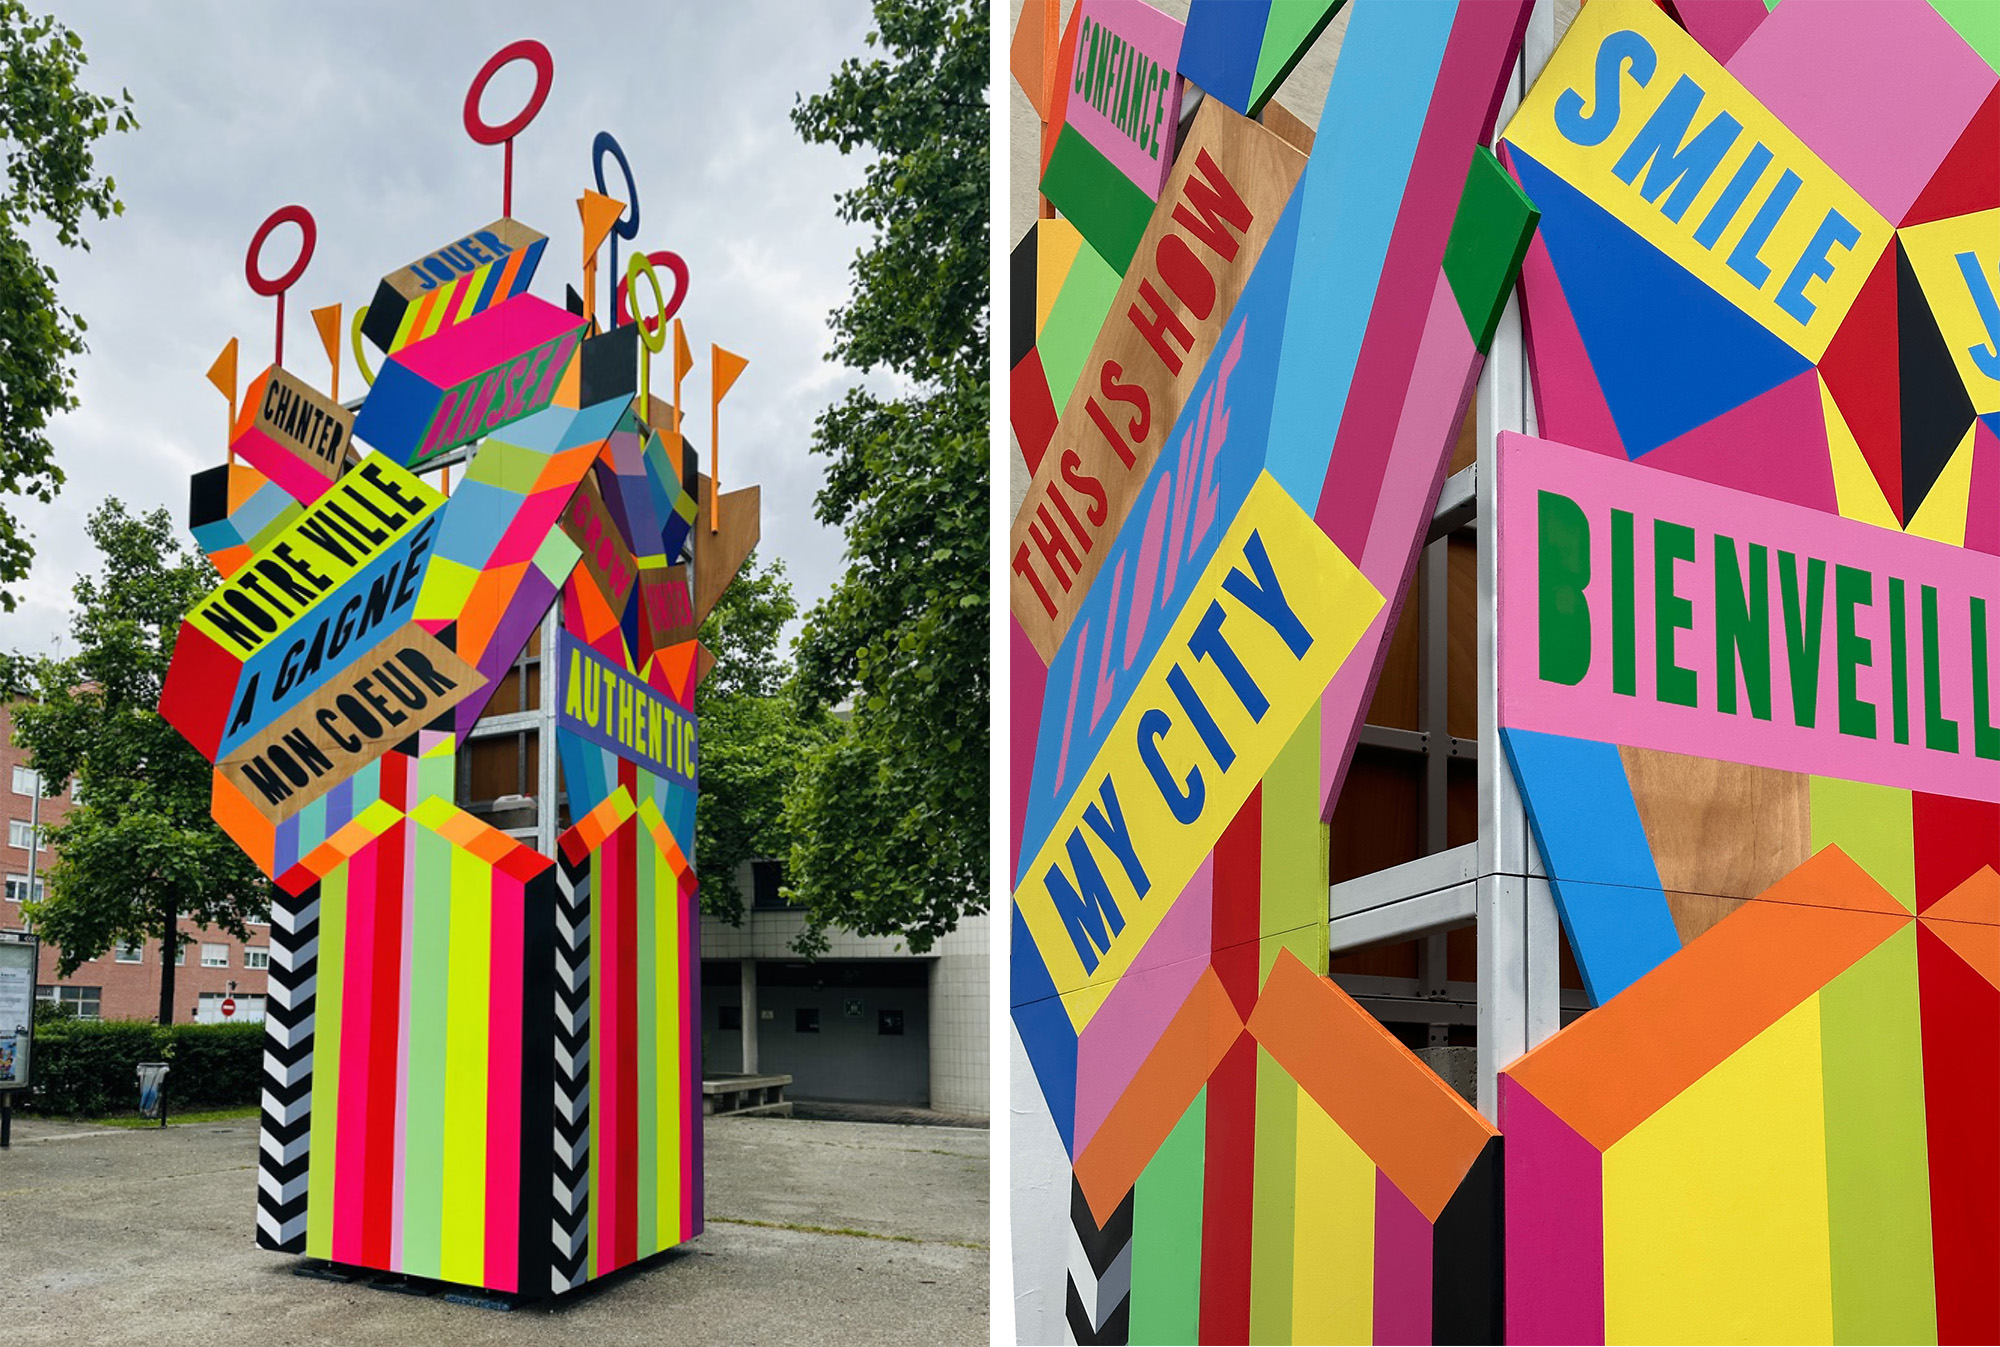 two side-by-side images of a geometric art installation outdoors with colorful panels and stripes